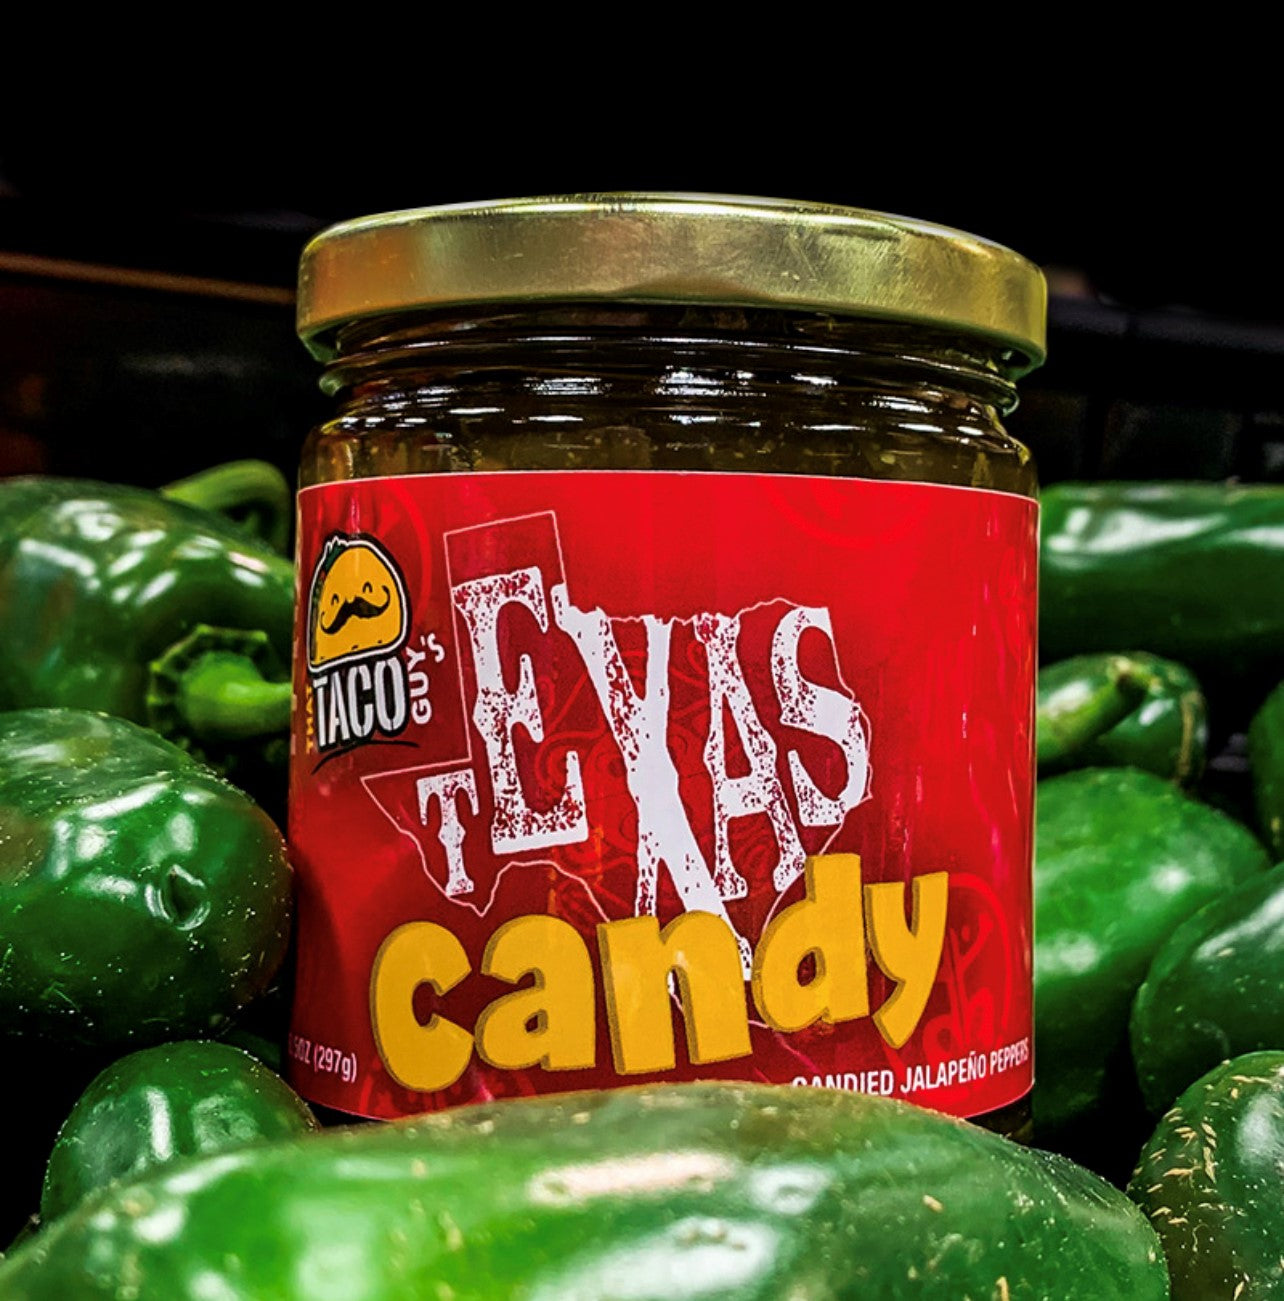 That Taco Guy's Texas Candy